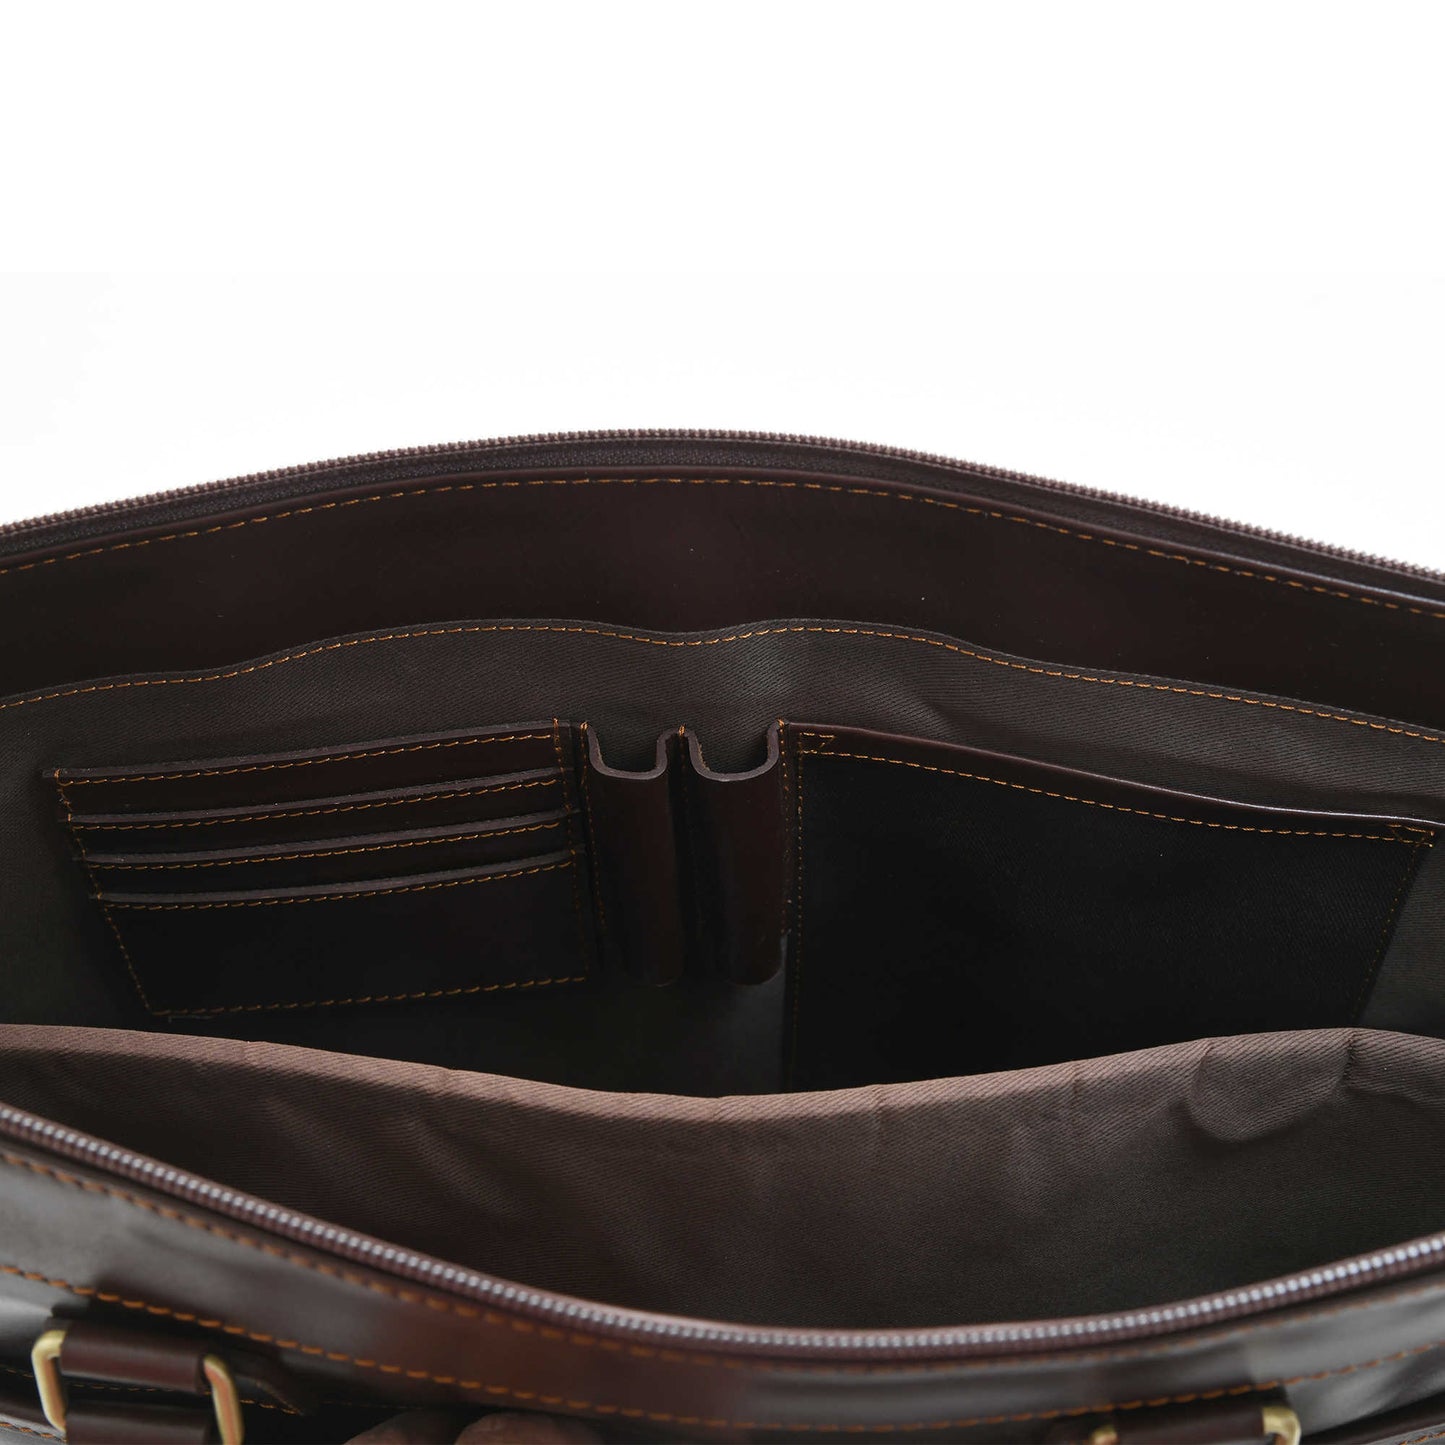 Style n Craft 392008 Men's Portfolio Briefcase Bag in Full Grain Dark Brown Leather - Inside View showing the Cushioned Compartment for holding the Laptop & Front Wall showing 4 Card Pockets, 2 Pen Holders & 1 Long Pocket, all in Leather